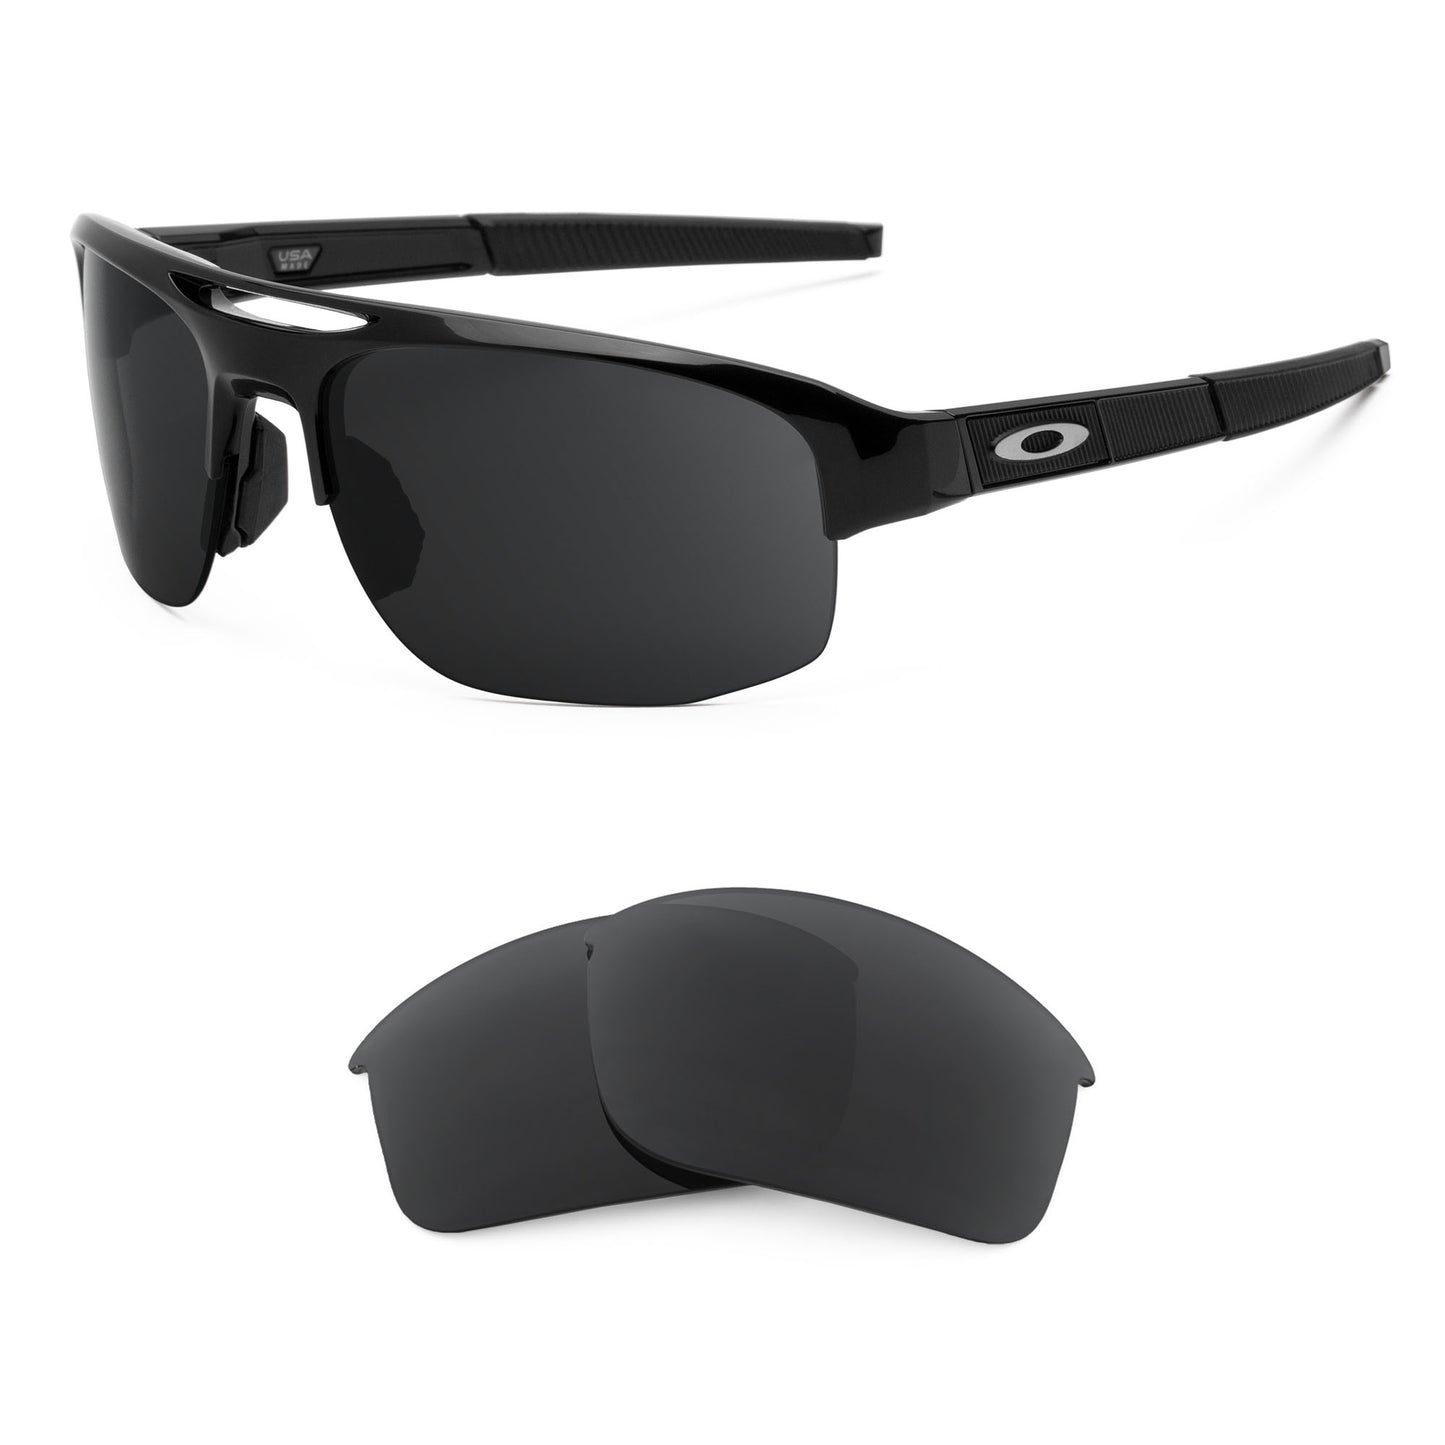 Oakley Mercenary sunglasses with replacement lenses